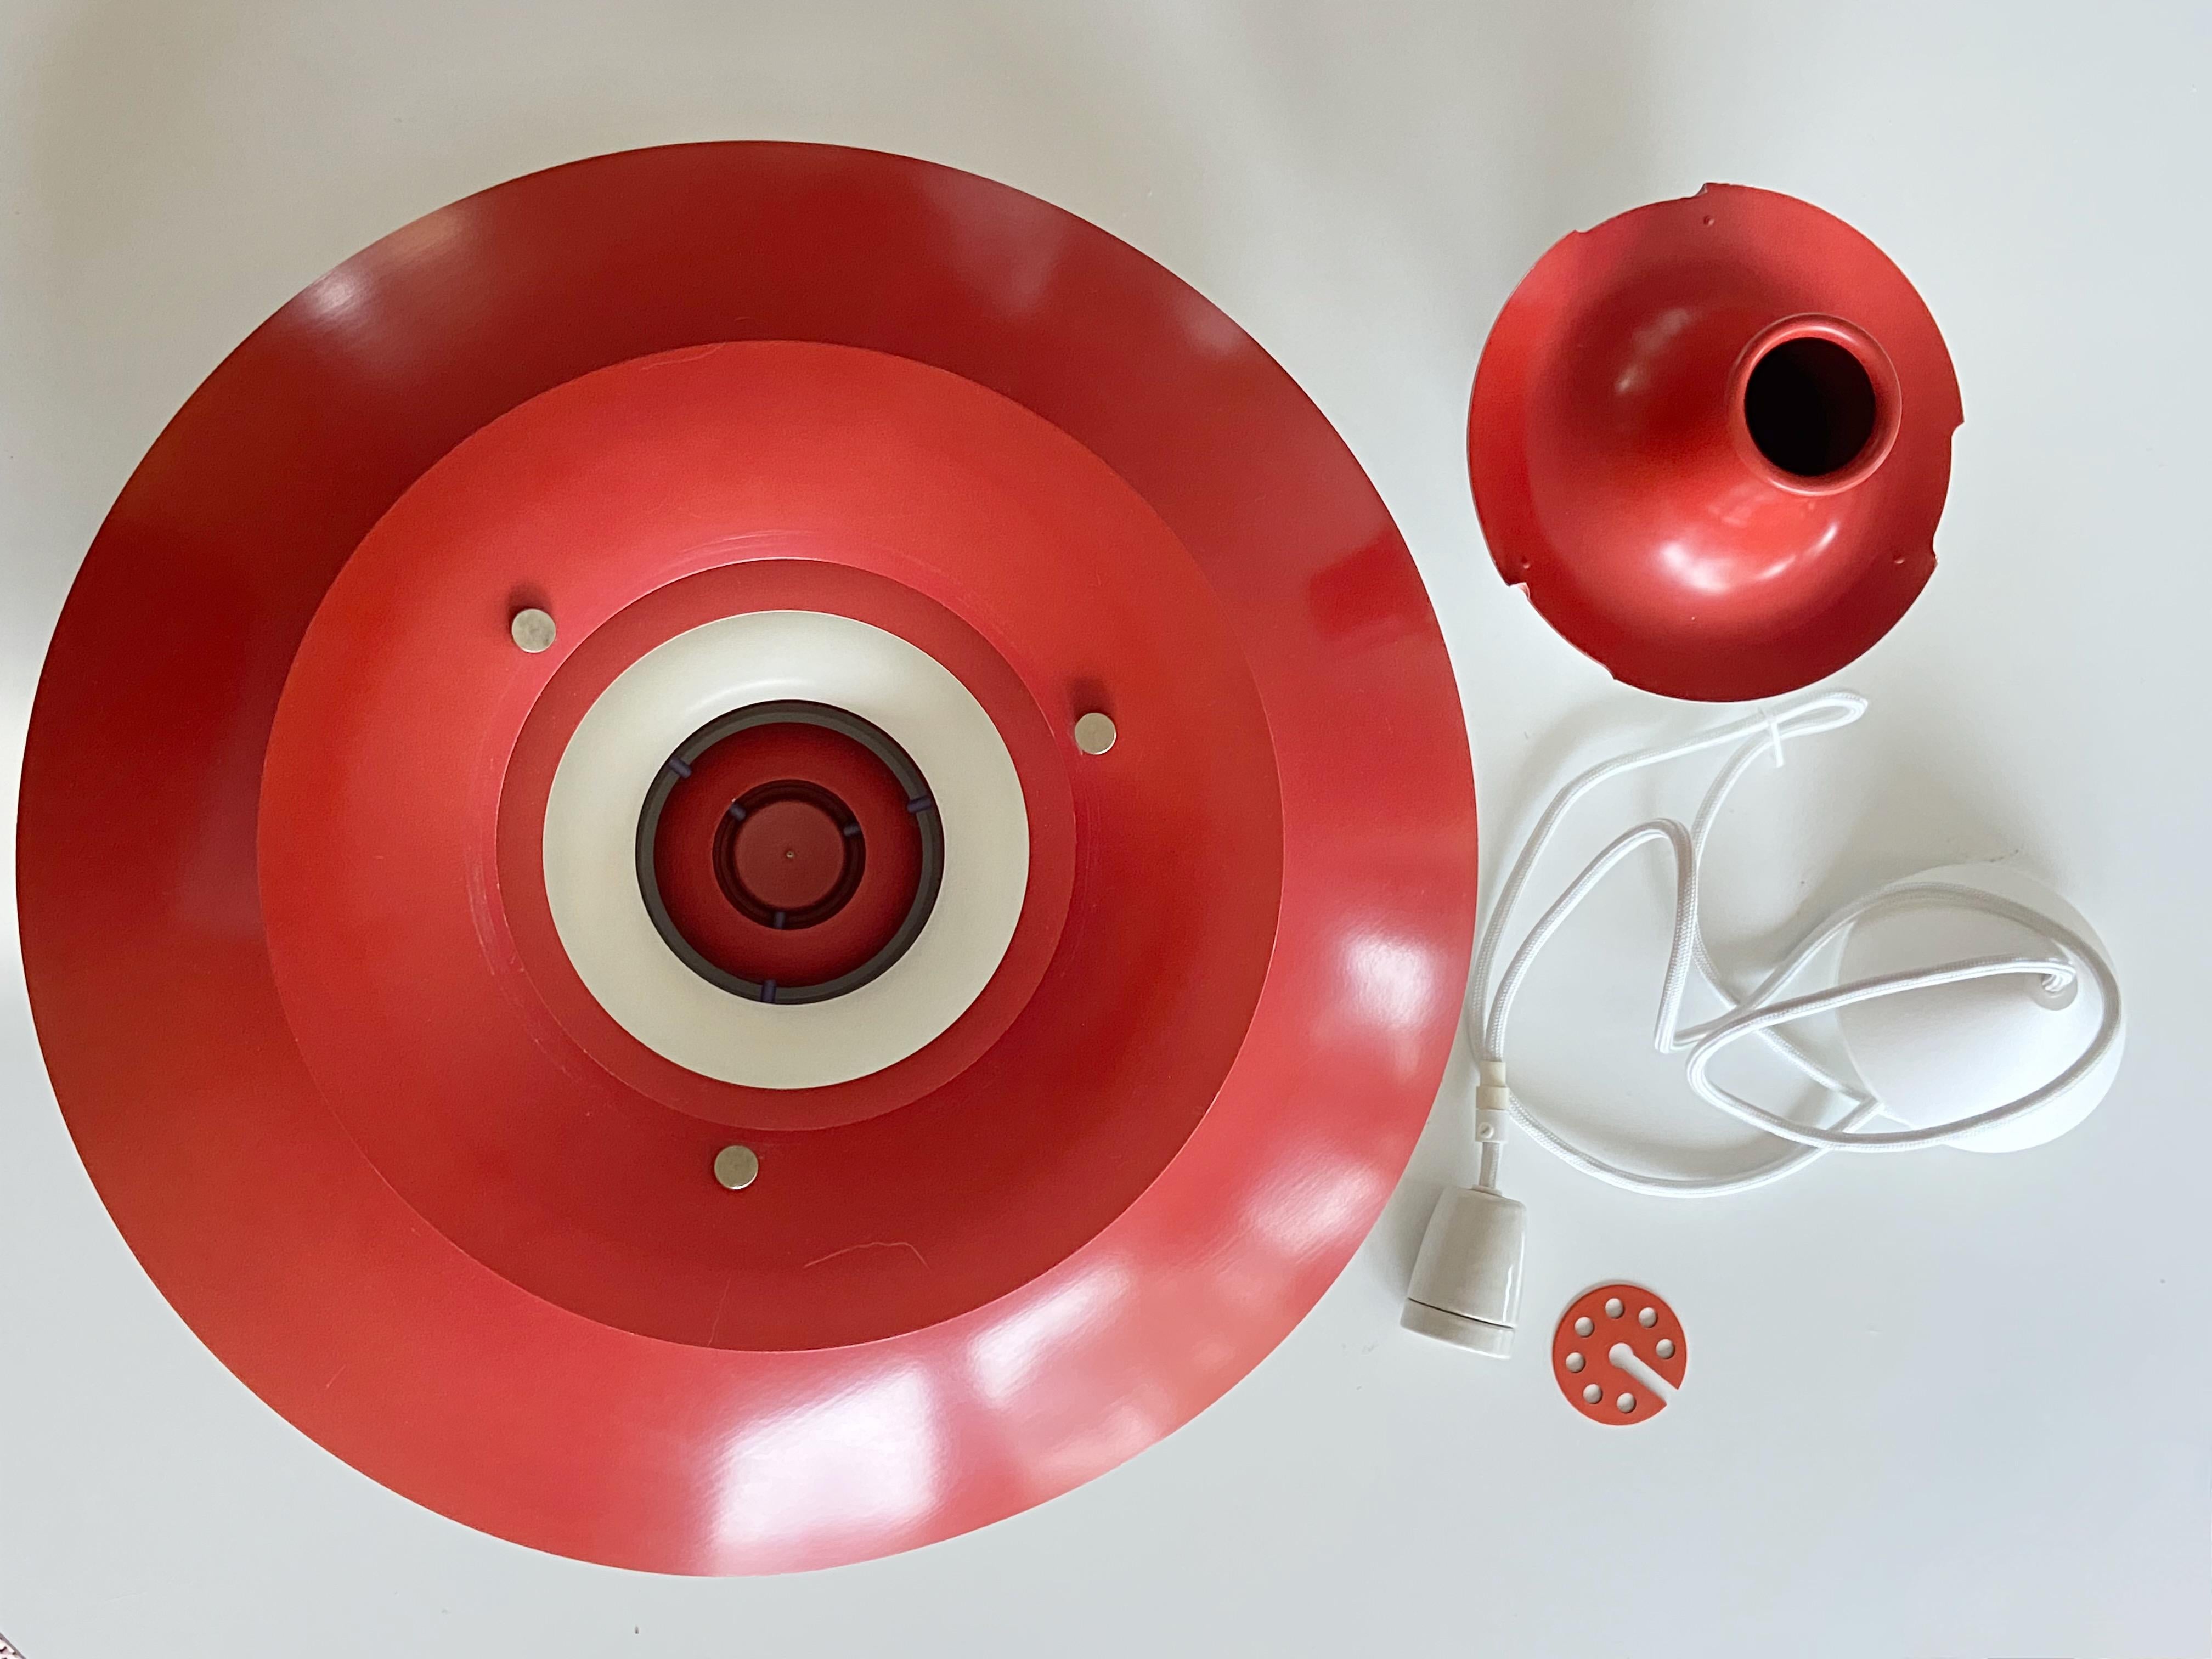 Nice vintage PH5 pendant lamp design by Poul Henningsen produced by Louis Poulsen, Made in Denmark. This is the nice old Version with the orange circle plate for the socket. The lamp is in very good condition. No parts missing, no larger scratches,